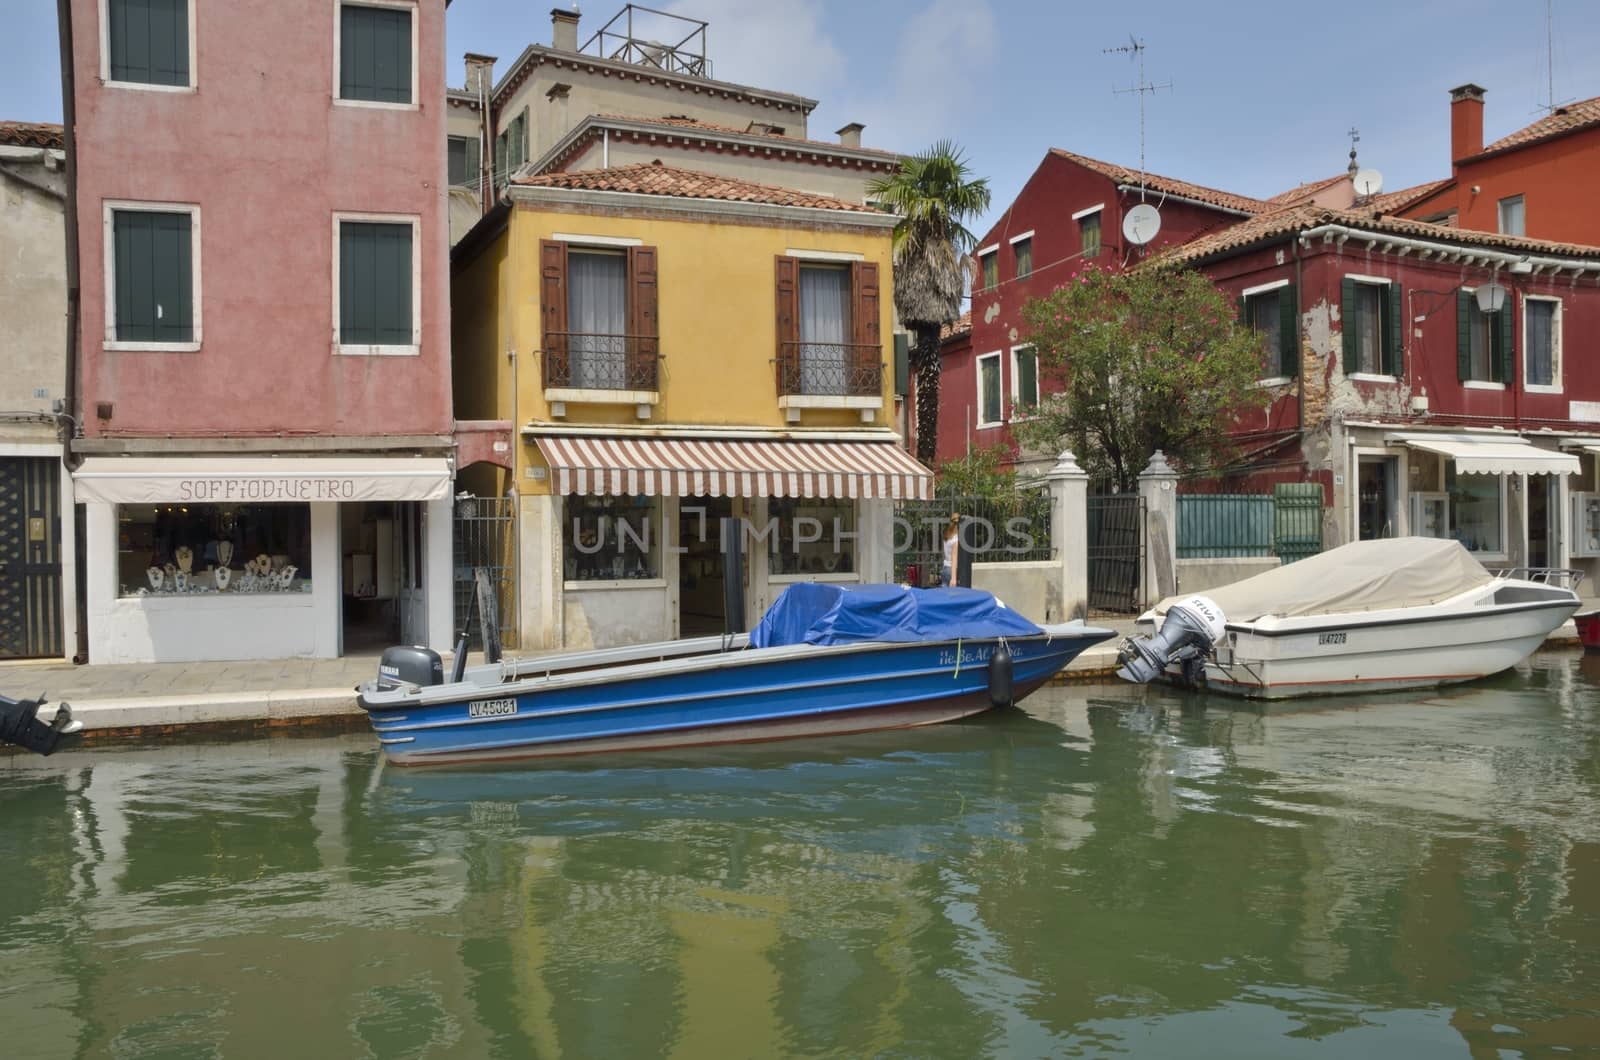 Boats parked in Murano canal by monysasi